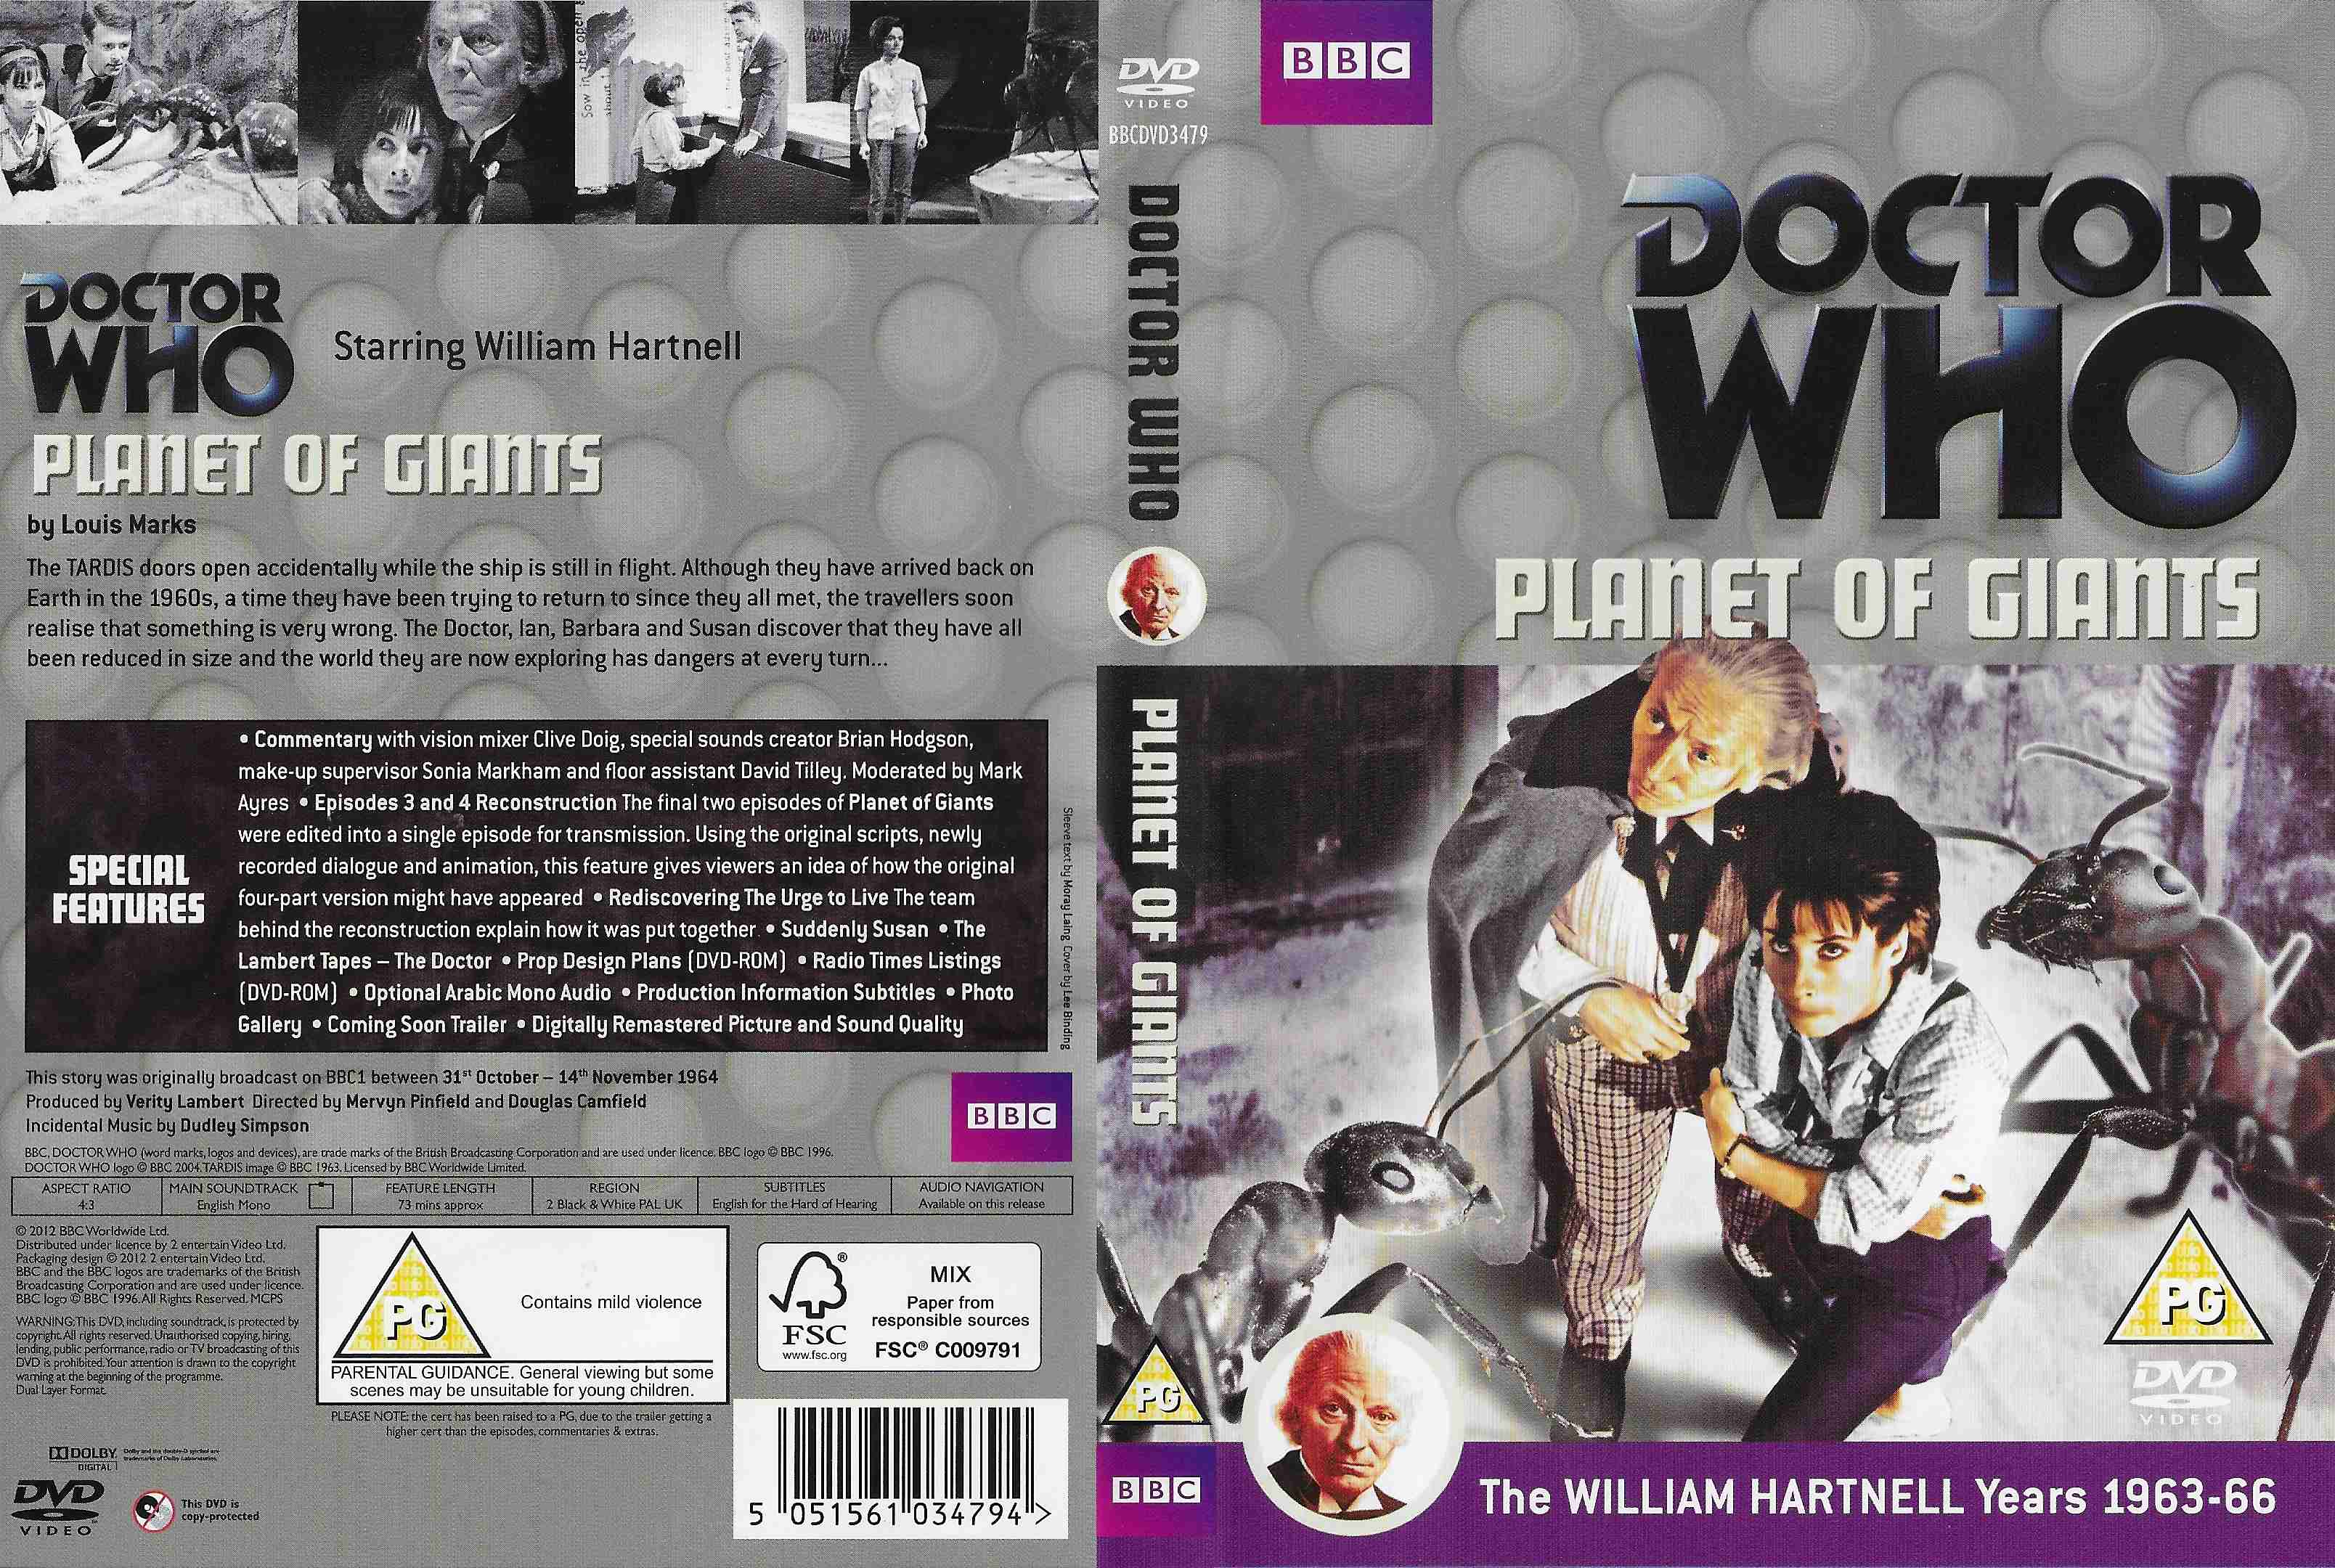 Picture of BBCDVD 3479 Doctor Who - Planet of giants by artist Louis Marks from the BBC records and Tapes library